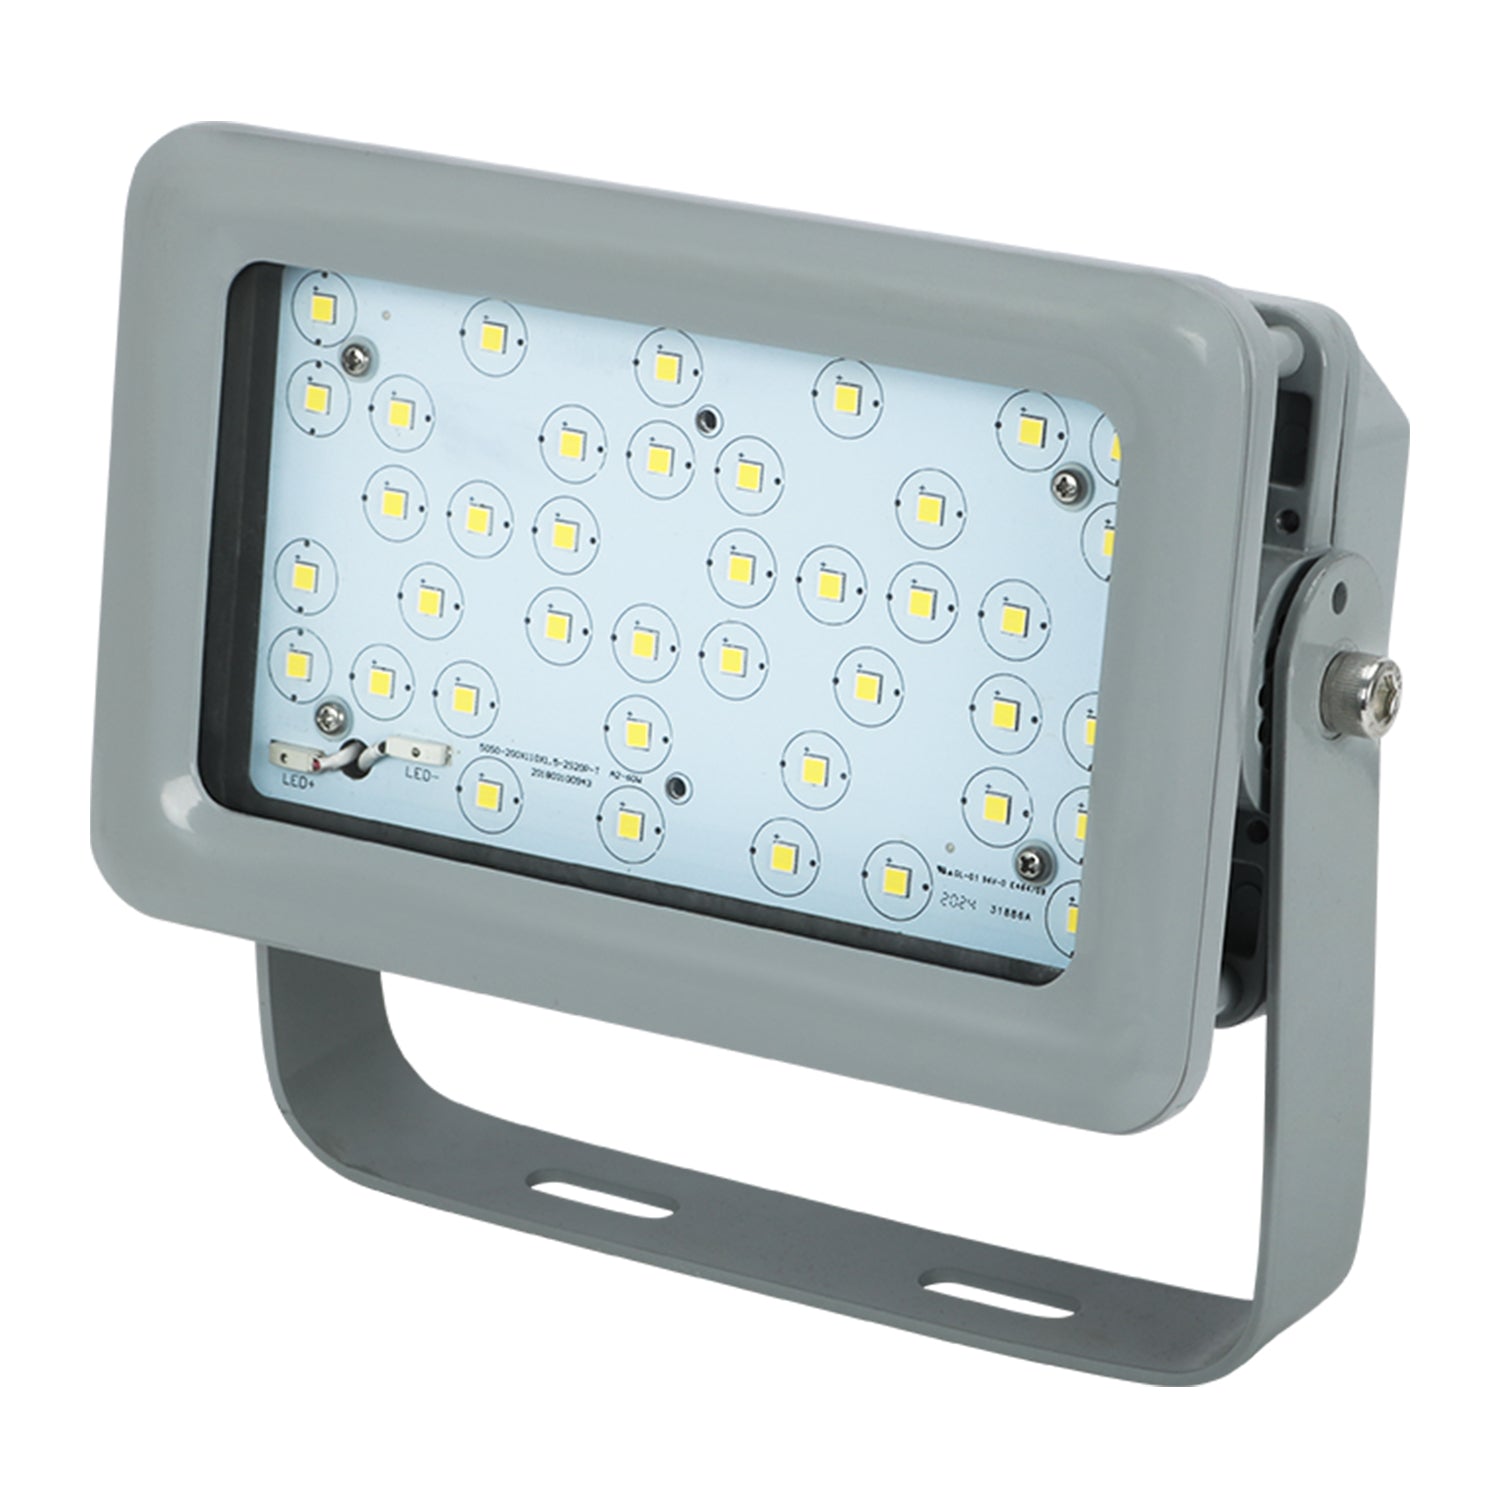 LED Explosion-Proof Flood Light - 400W - 5000K, 56000Lumens for Hazardous Locations - Dimmable, IP66 Rated, High-Intensity and Flexible